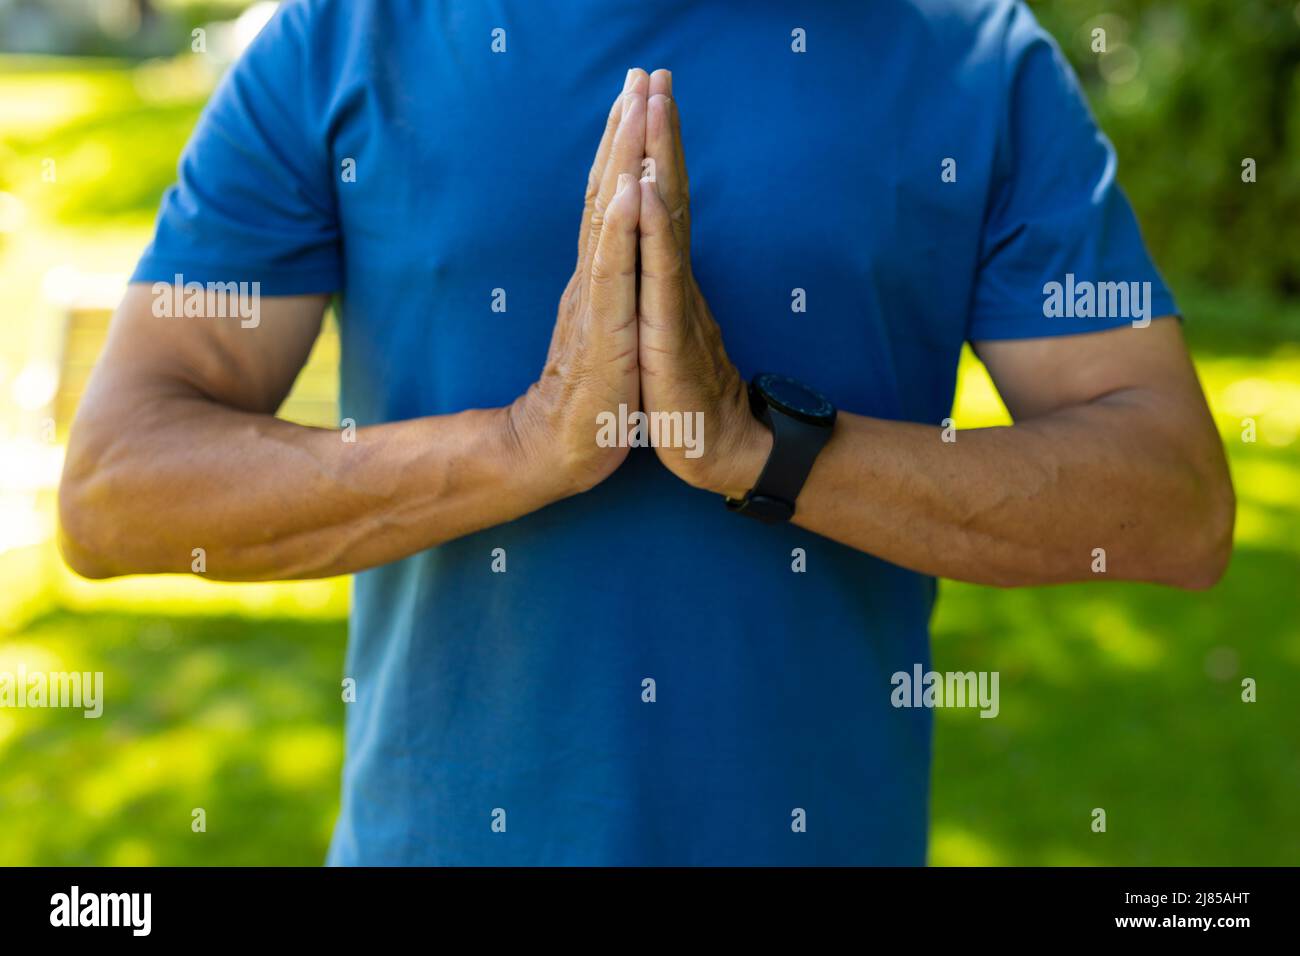 Midsection of biracial senior man wearing blue sports clothing standing in prayer position at yard Stock Photo